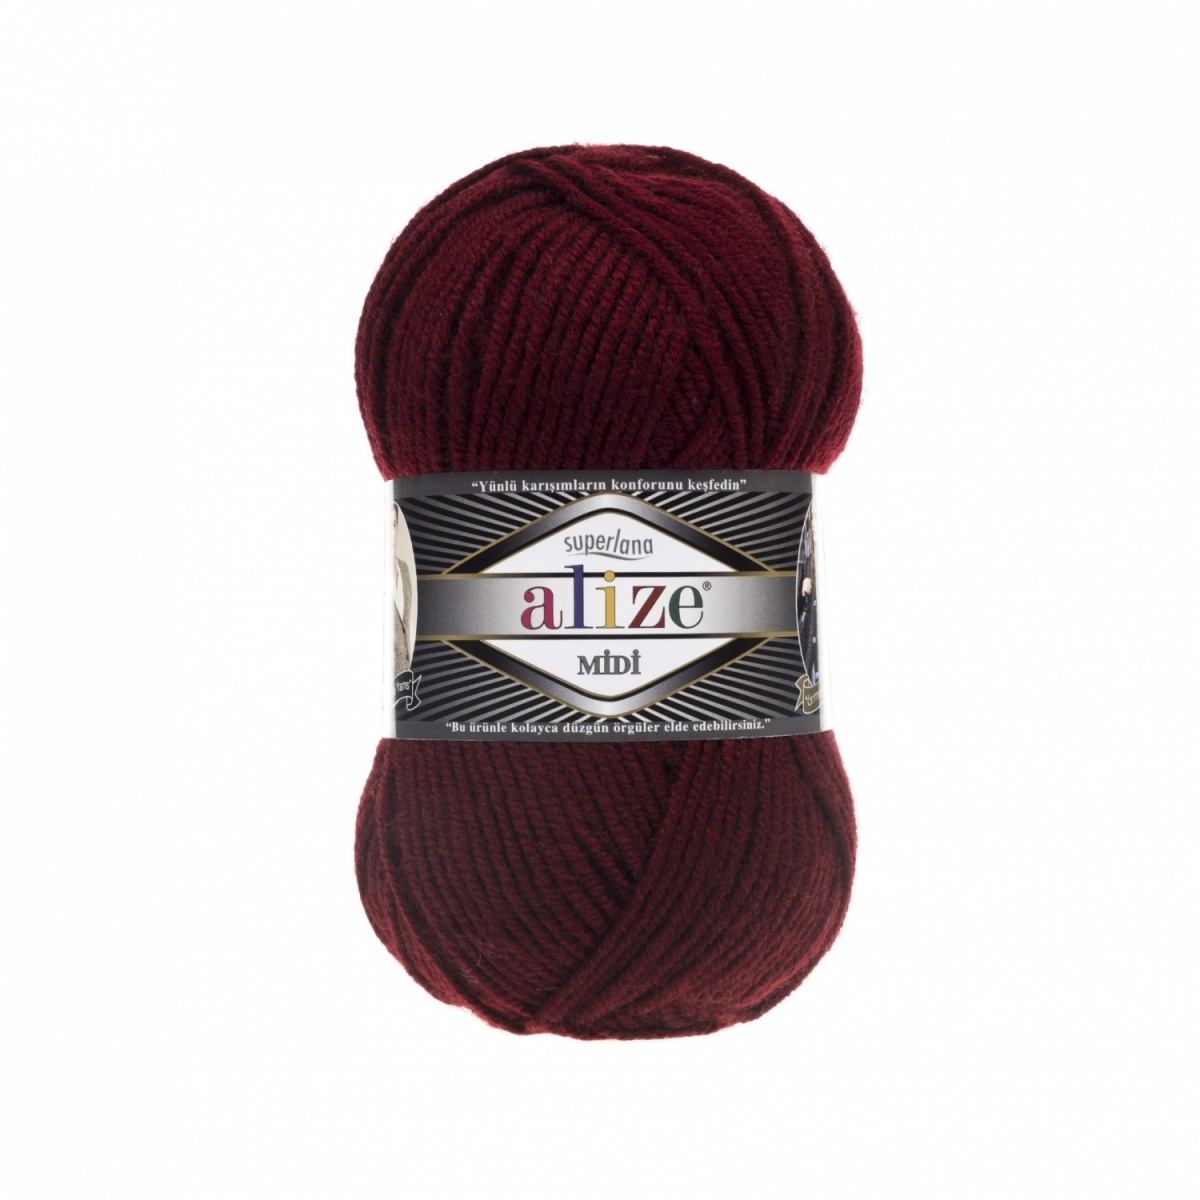 Alize Superlana Midi 25% Wool, 75% Acrylic, 5 Skein Value Pack, 500g фото 1